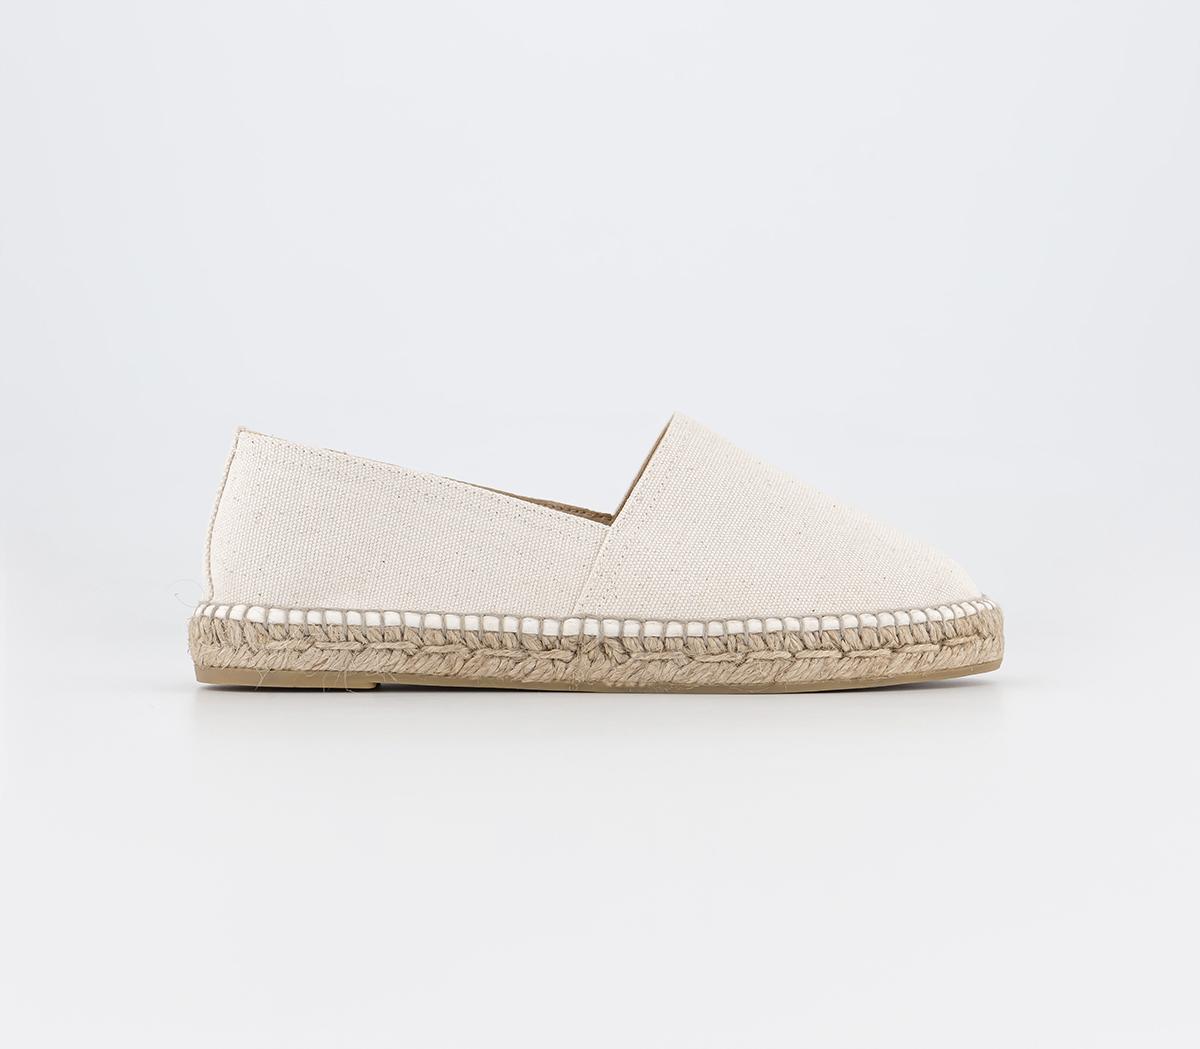 Gaimo for OFFICE Camping Slip On Espadrilles Cream Canvas - Flat Shoes ...